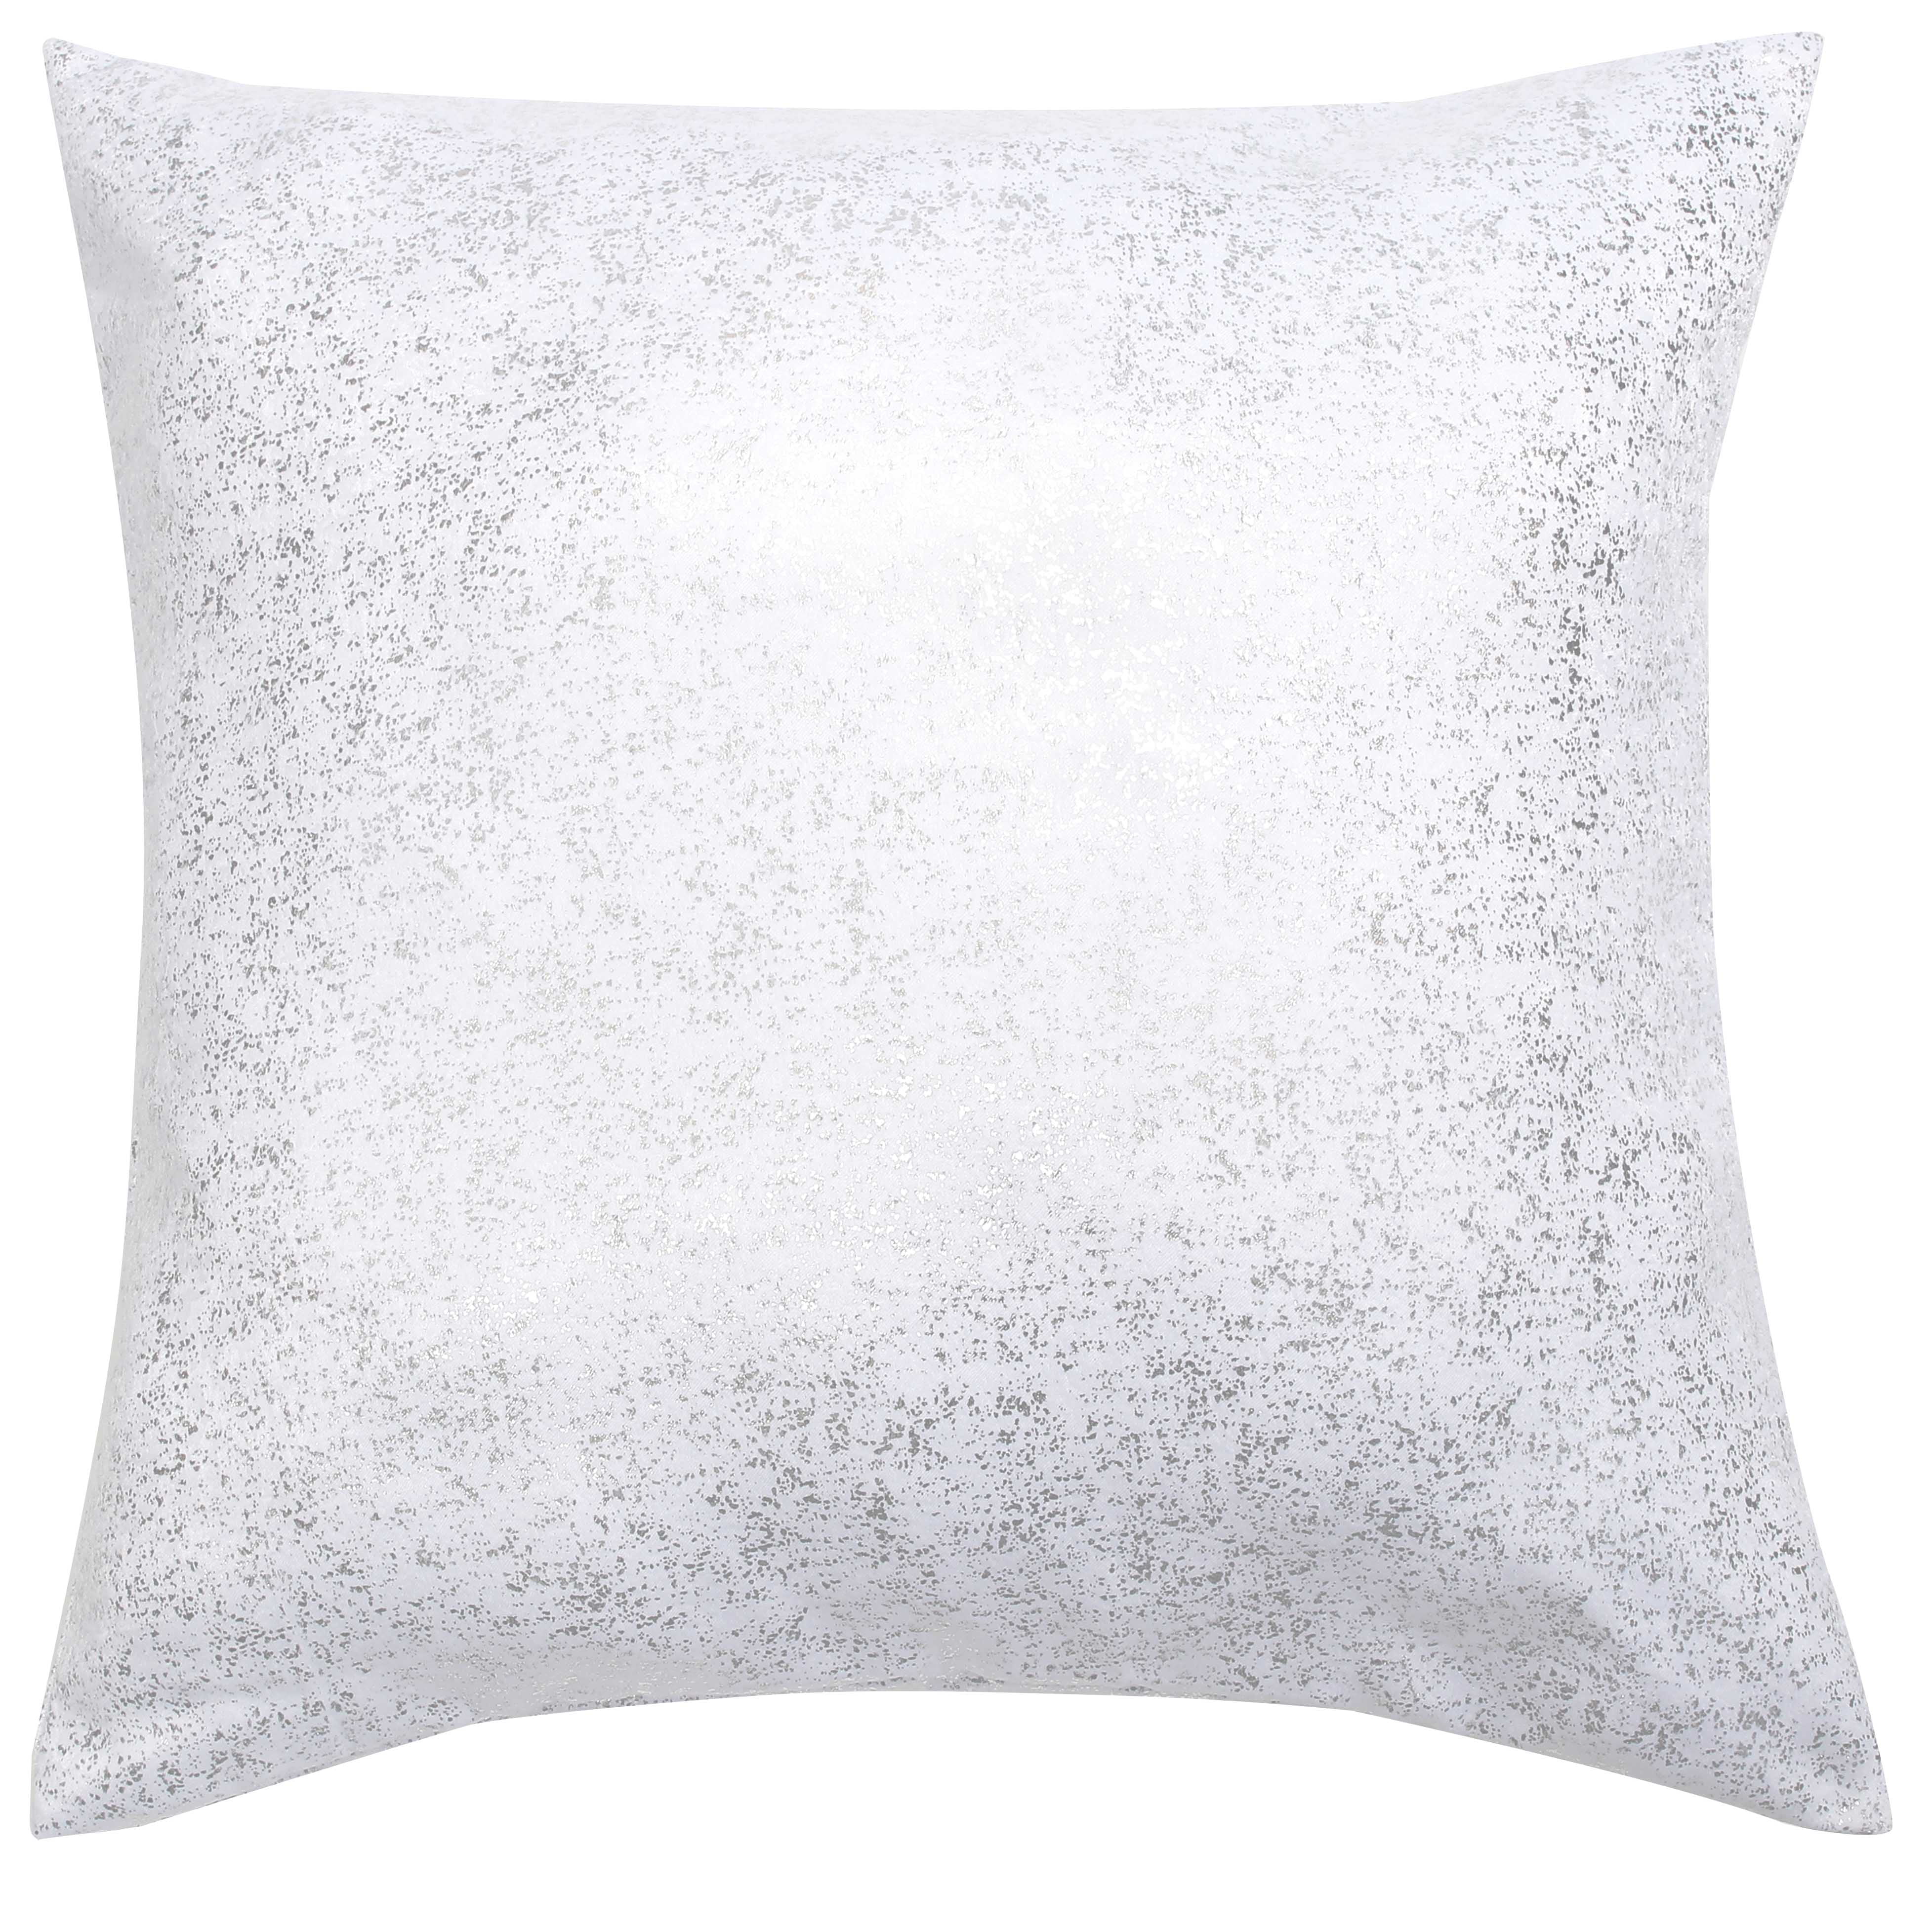 Blue Single Euro/Square Size Pillow Sham with Metallic Accent 26in x 26in 1 